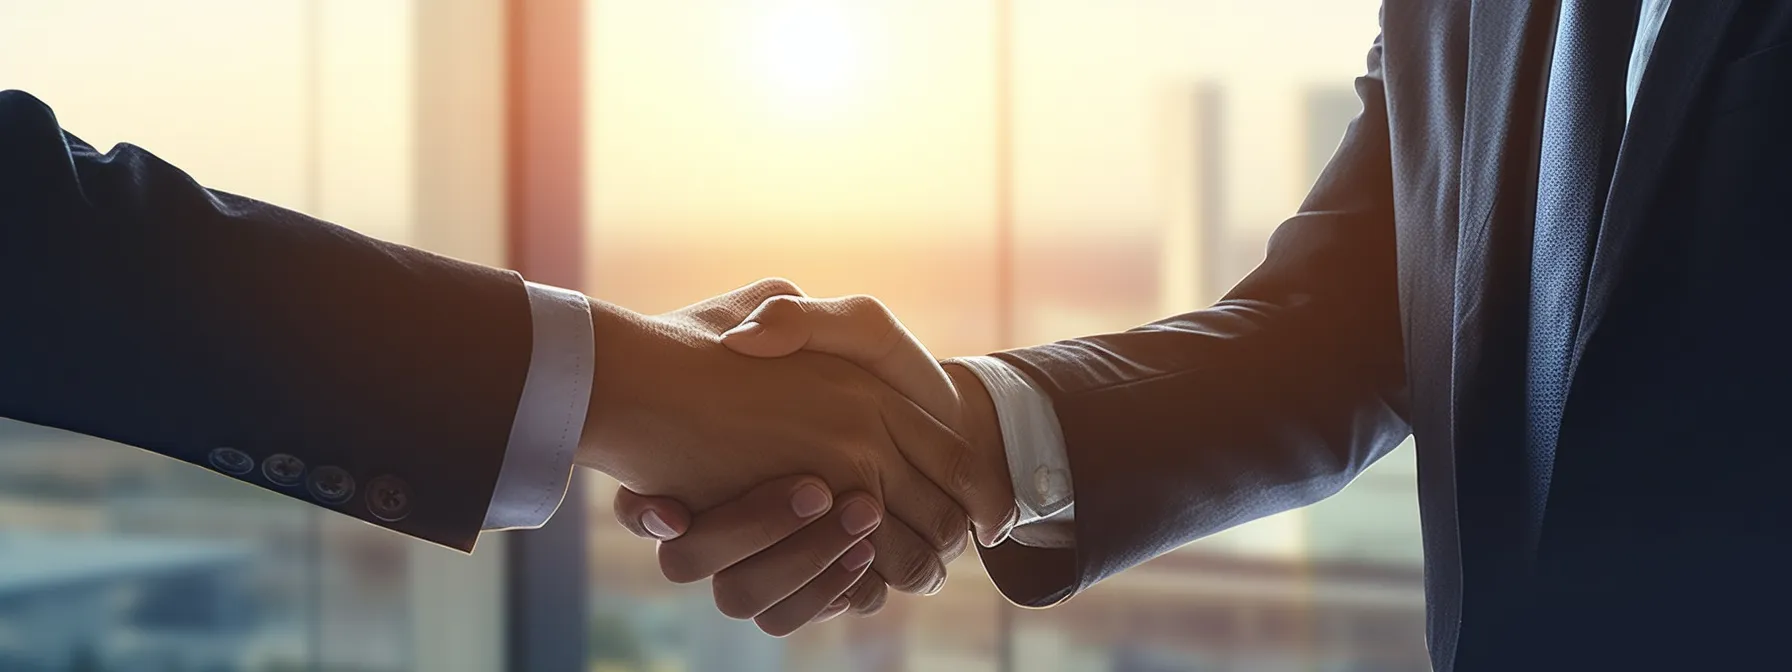 two business professionals shake hands and exchange documents, symbolizing the successful completion of a contract or agreement.